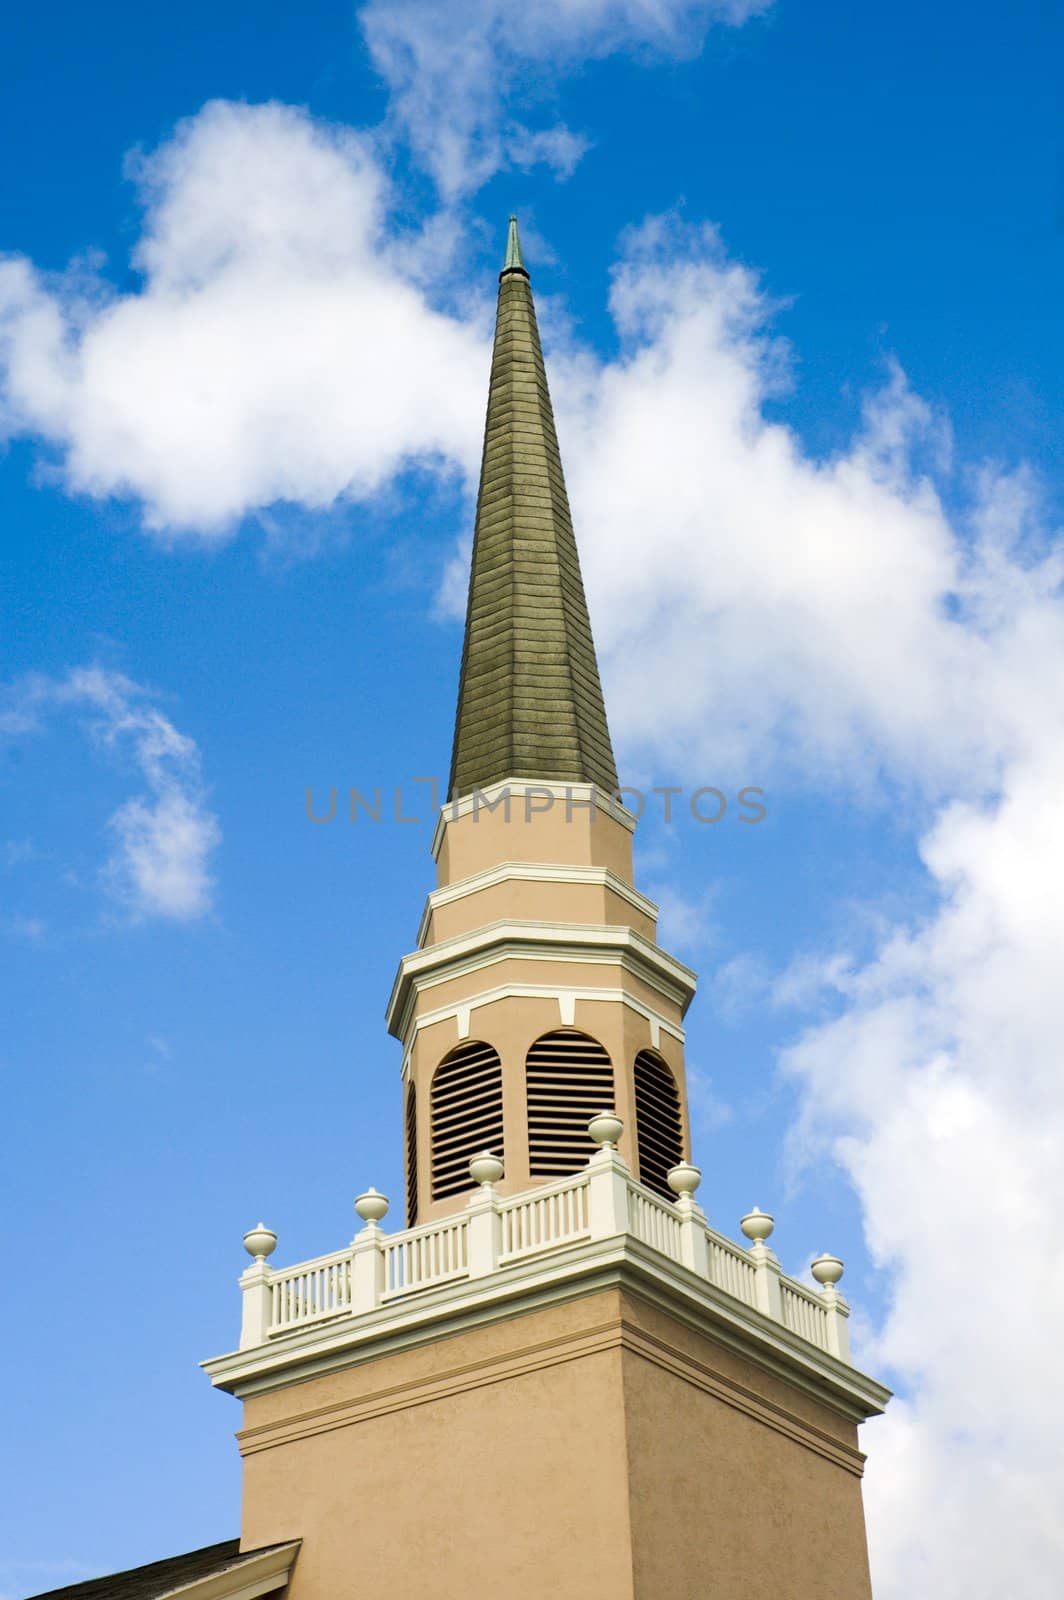 Close up of a small town church steeple against a blue sky with clouds